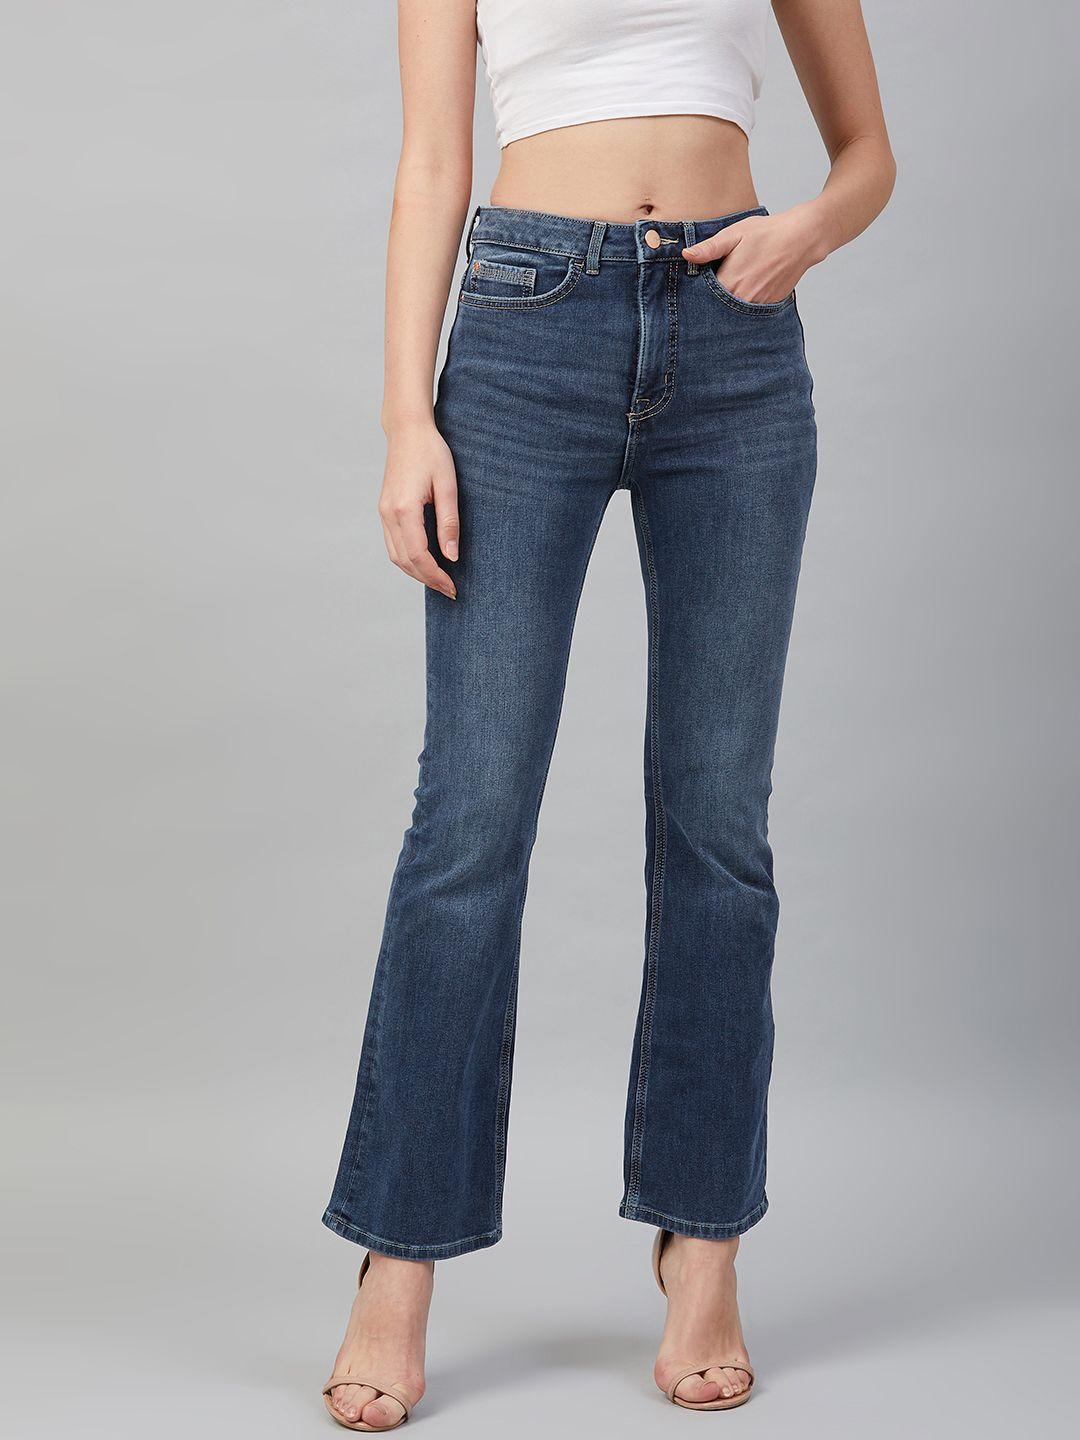 marks-&-spencer-women-blue-bootcut-mid-rise-clean-look-stretchable-jeans